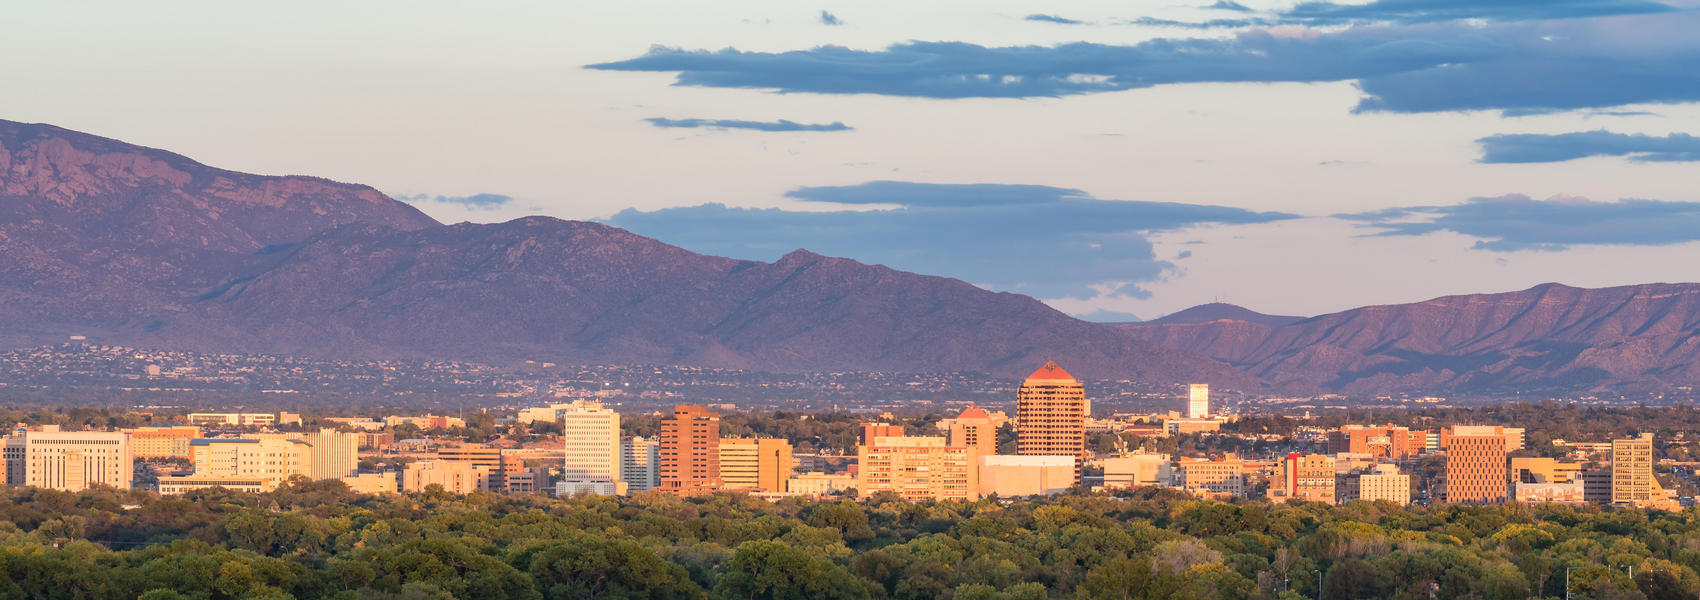 Panoramic view of downtown Albuquerque with mountains in background